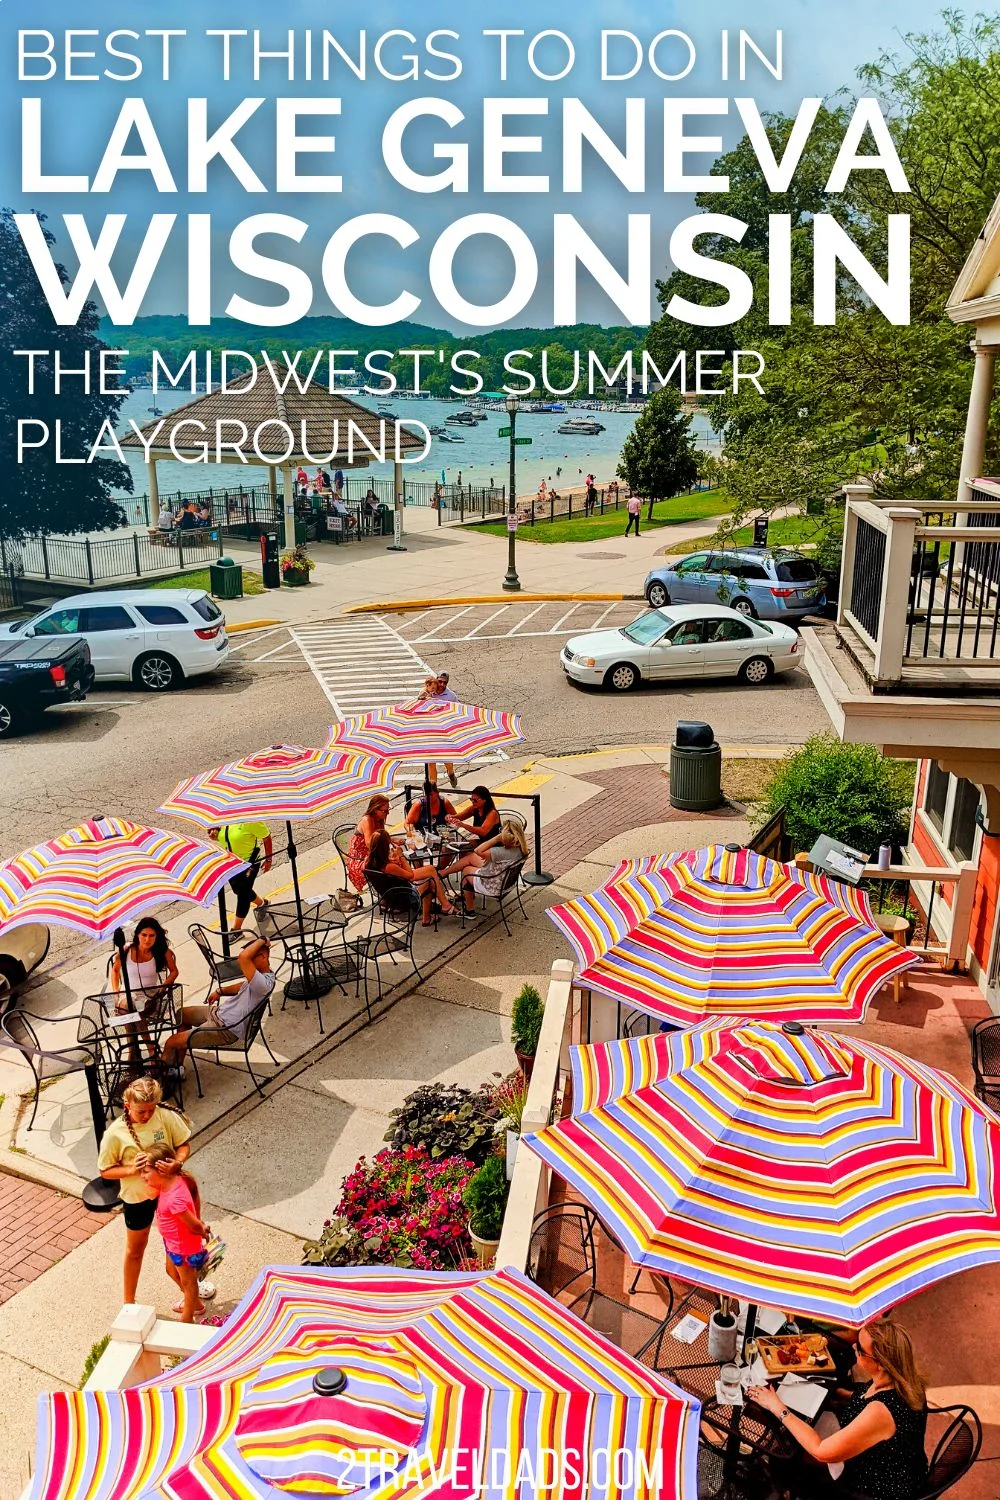 Lake Geneva is THE summer destination in Wisconsin with so many things to do both on the lake and around farm country. Check out the best of this bygone era Midwest playground, including how to explore the famous Lake Geneva Shore Path.